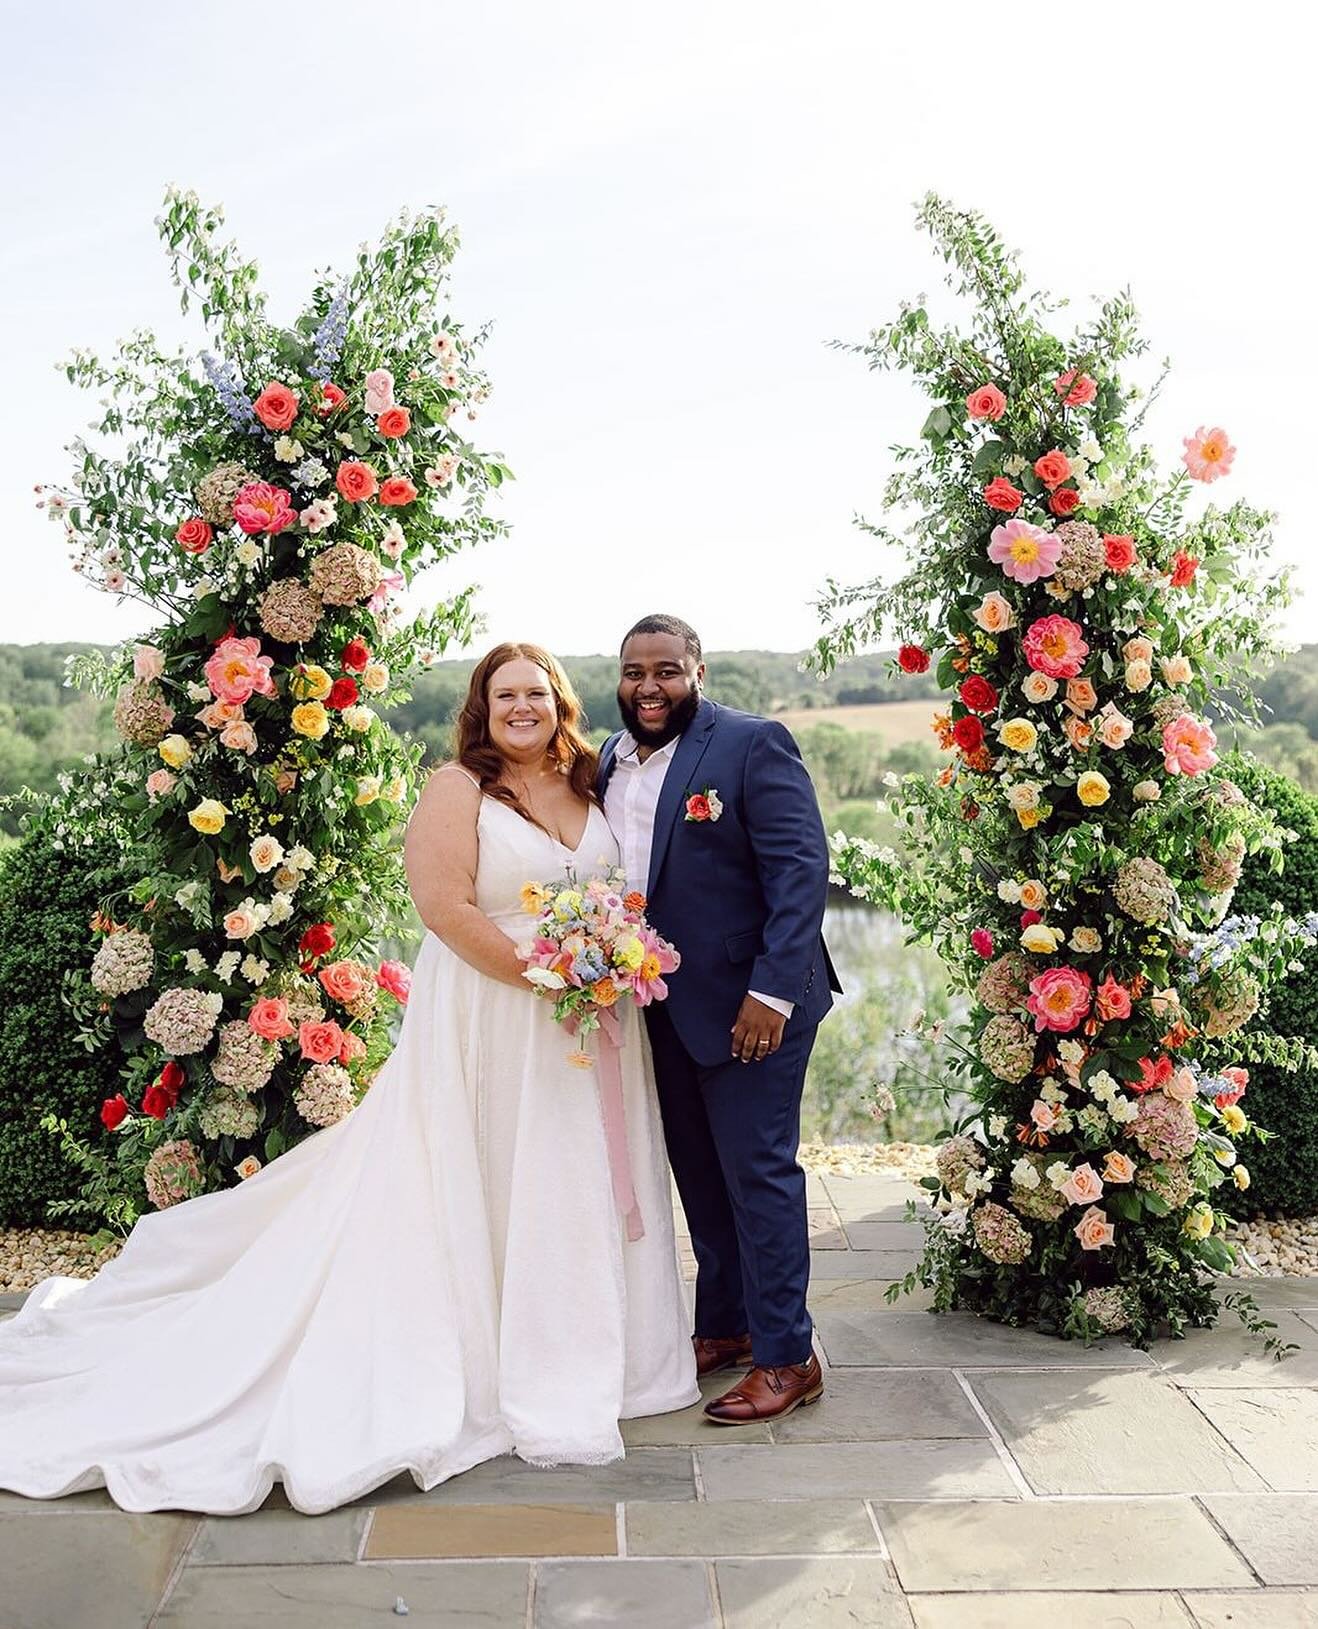 still reeling from last weekend&rsquo;s wedding celebrating the lee&rsquo;s ✨️ @nickimetcalfphotography 
.
.
.
venue: @estateatriverrun 
florals: @fleuressencefloraldesign 
beauty: @amandaperry.hair.airbrush